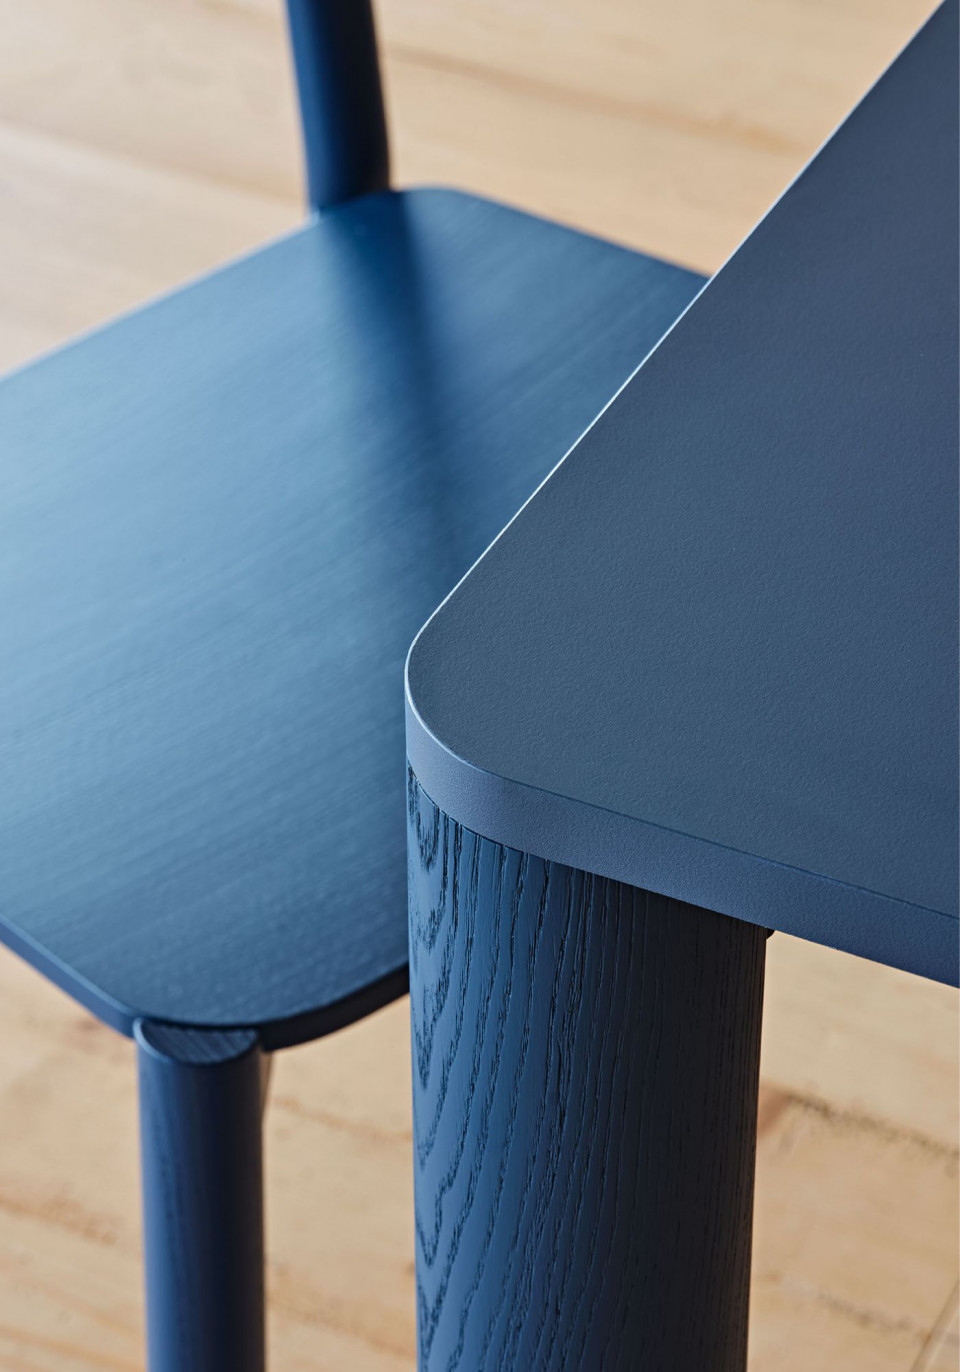 extendable table Woody designed by Midj